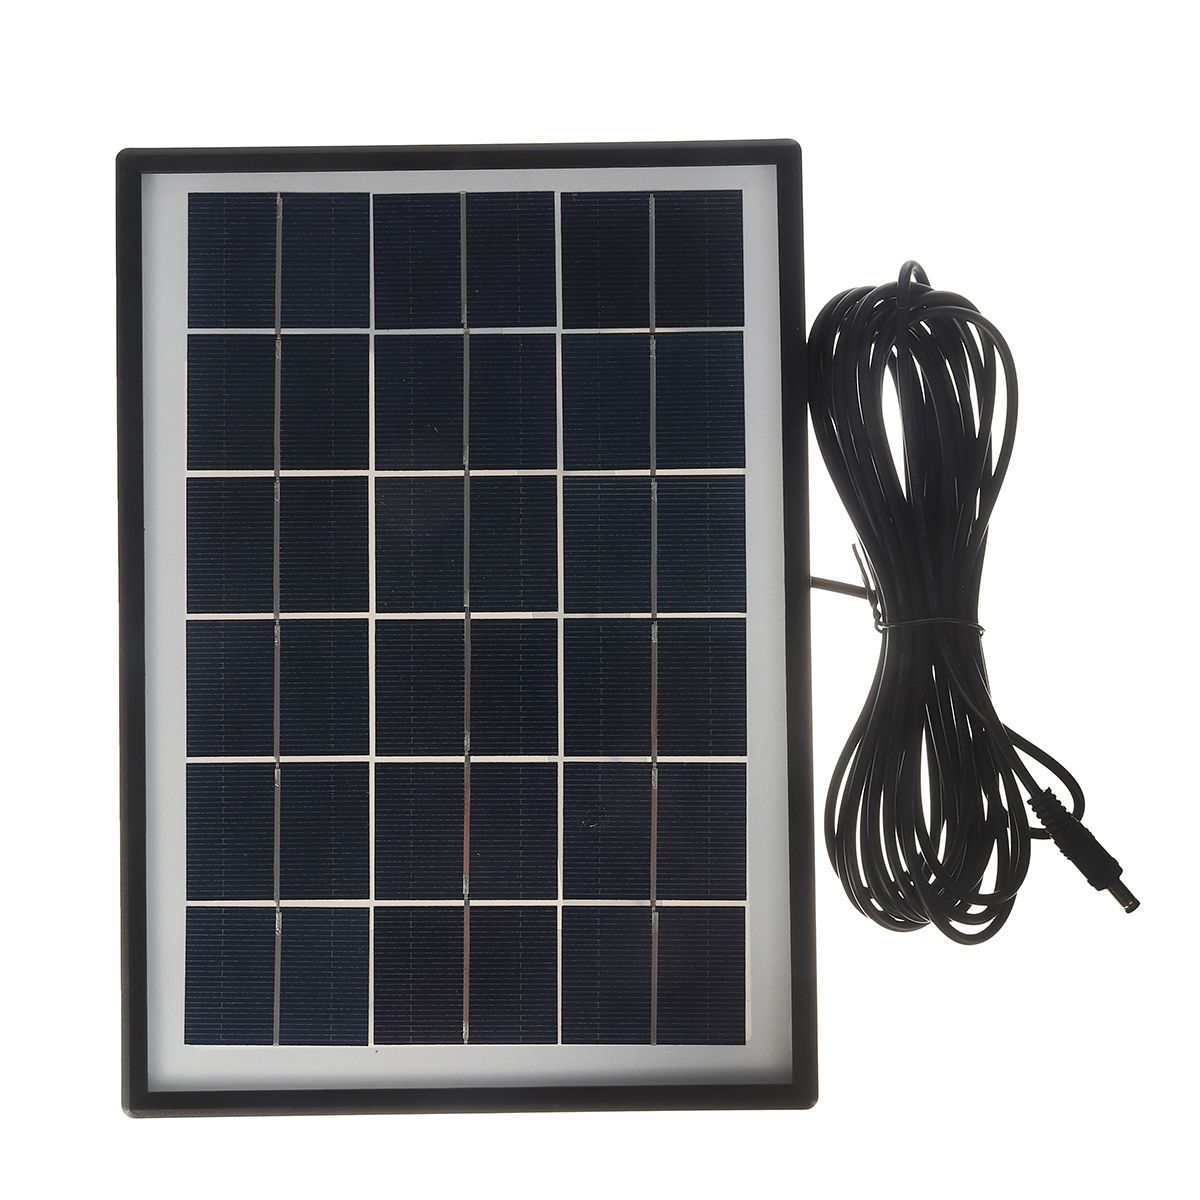 Solar-Panel-Generator-System-Portable-Home-Kit-with-3PCS-3W-LED-Light-Bulb-USB-Charger-Camping-Lamp-1754329